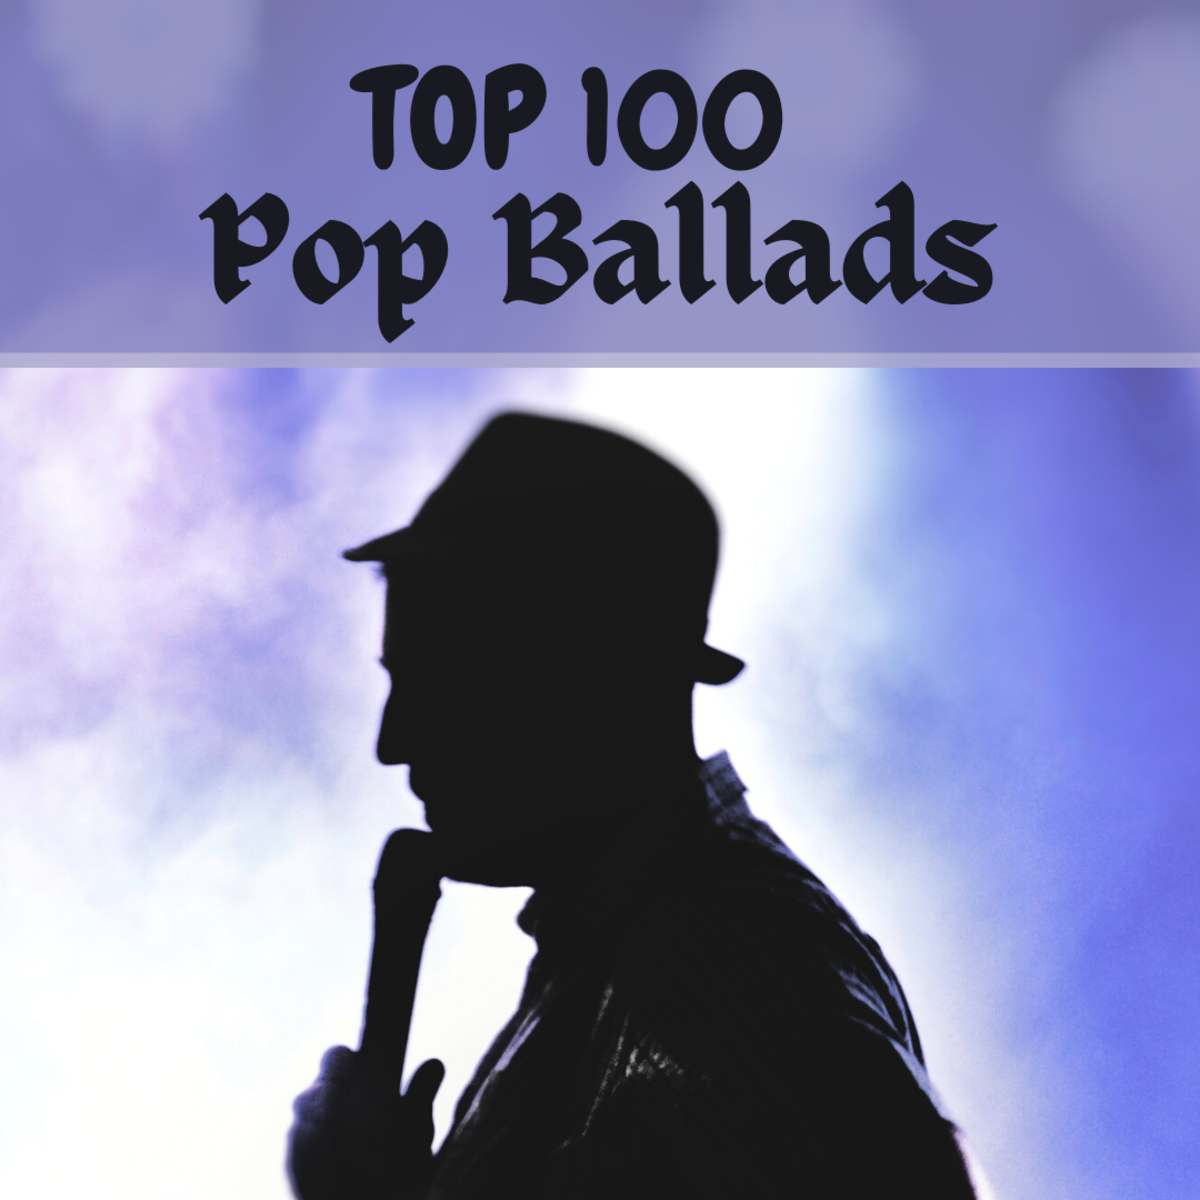 What are the top 100 modern pop ballads? Find out here!